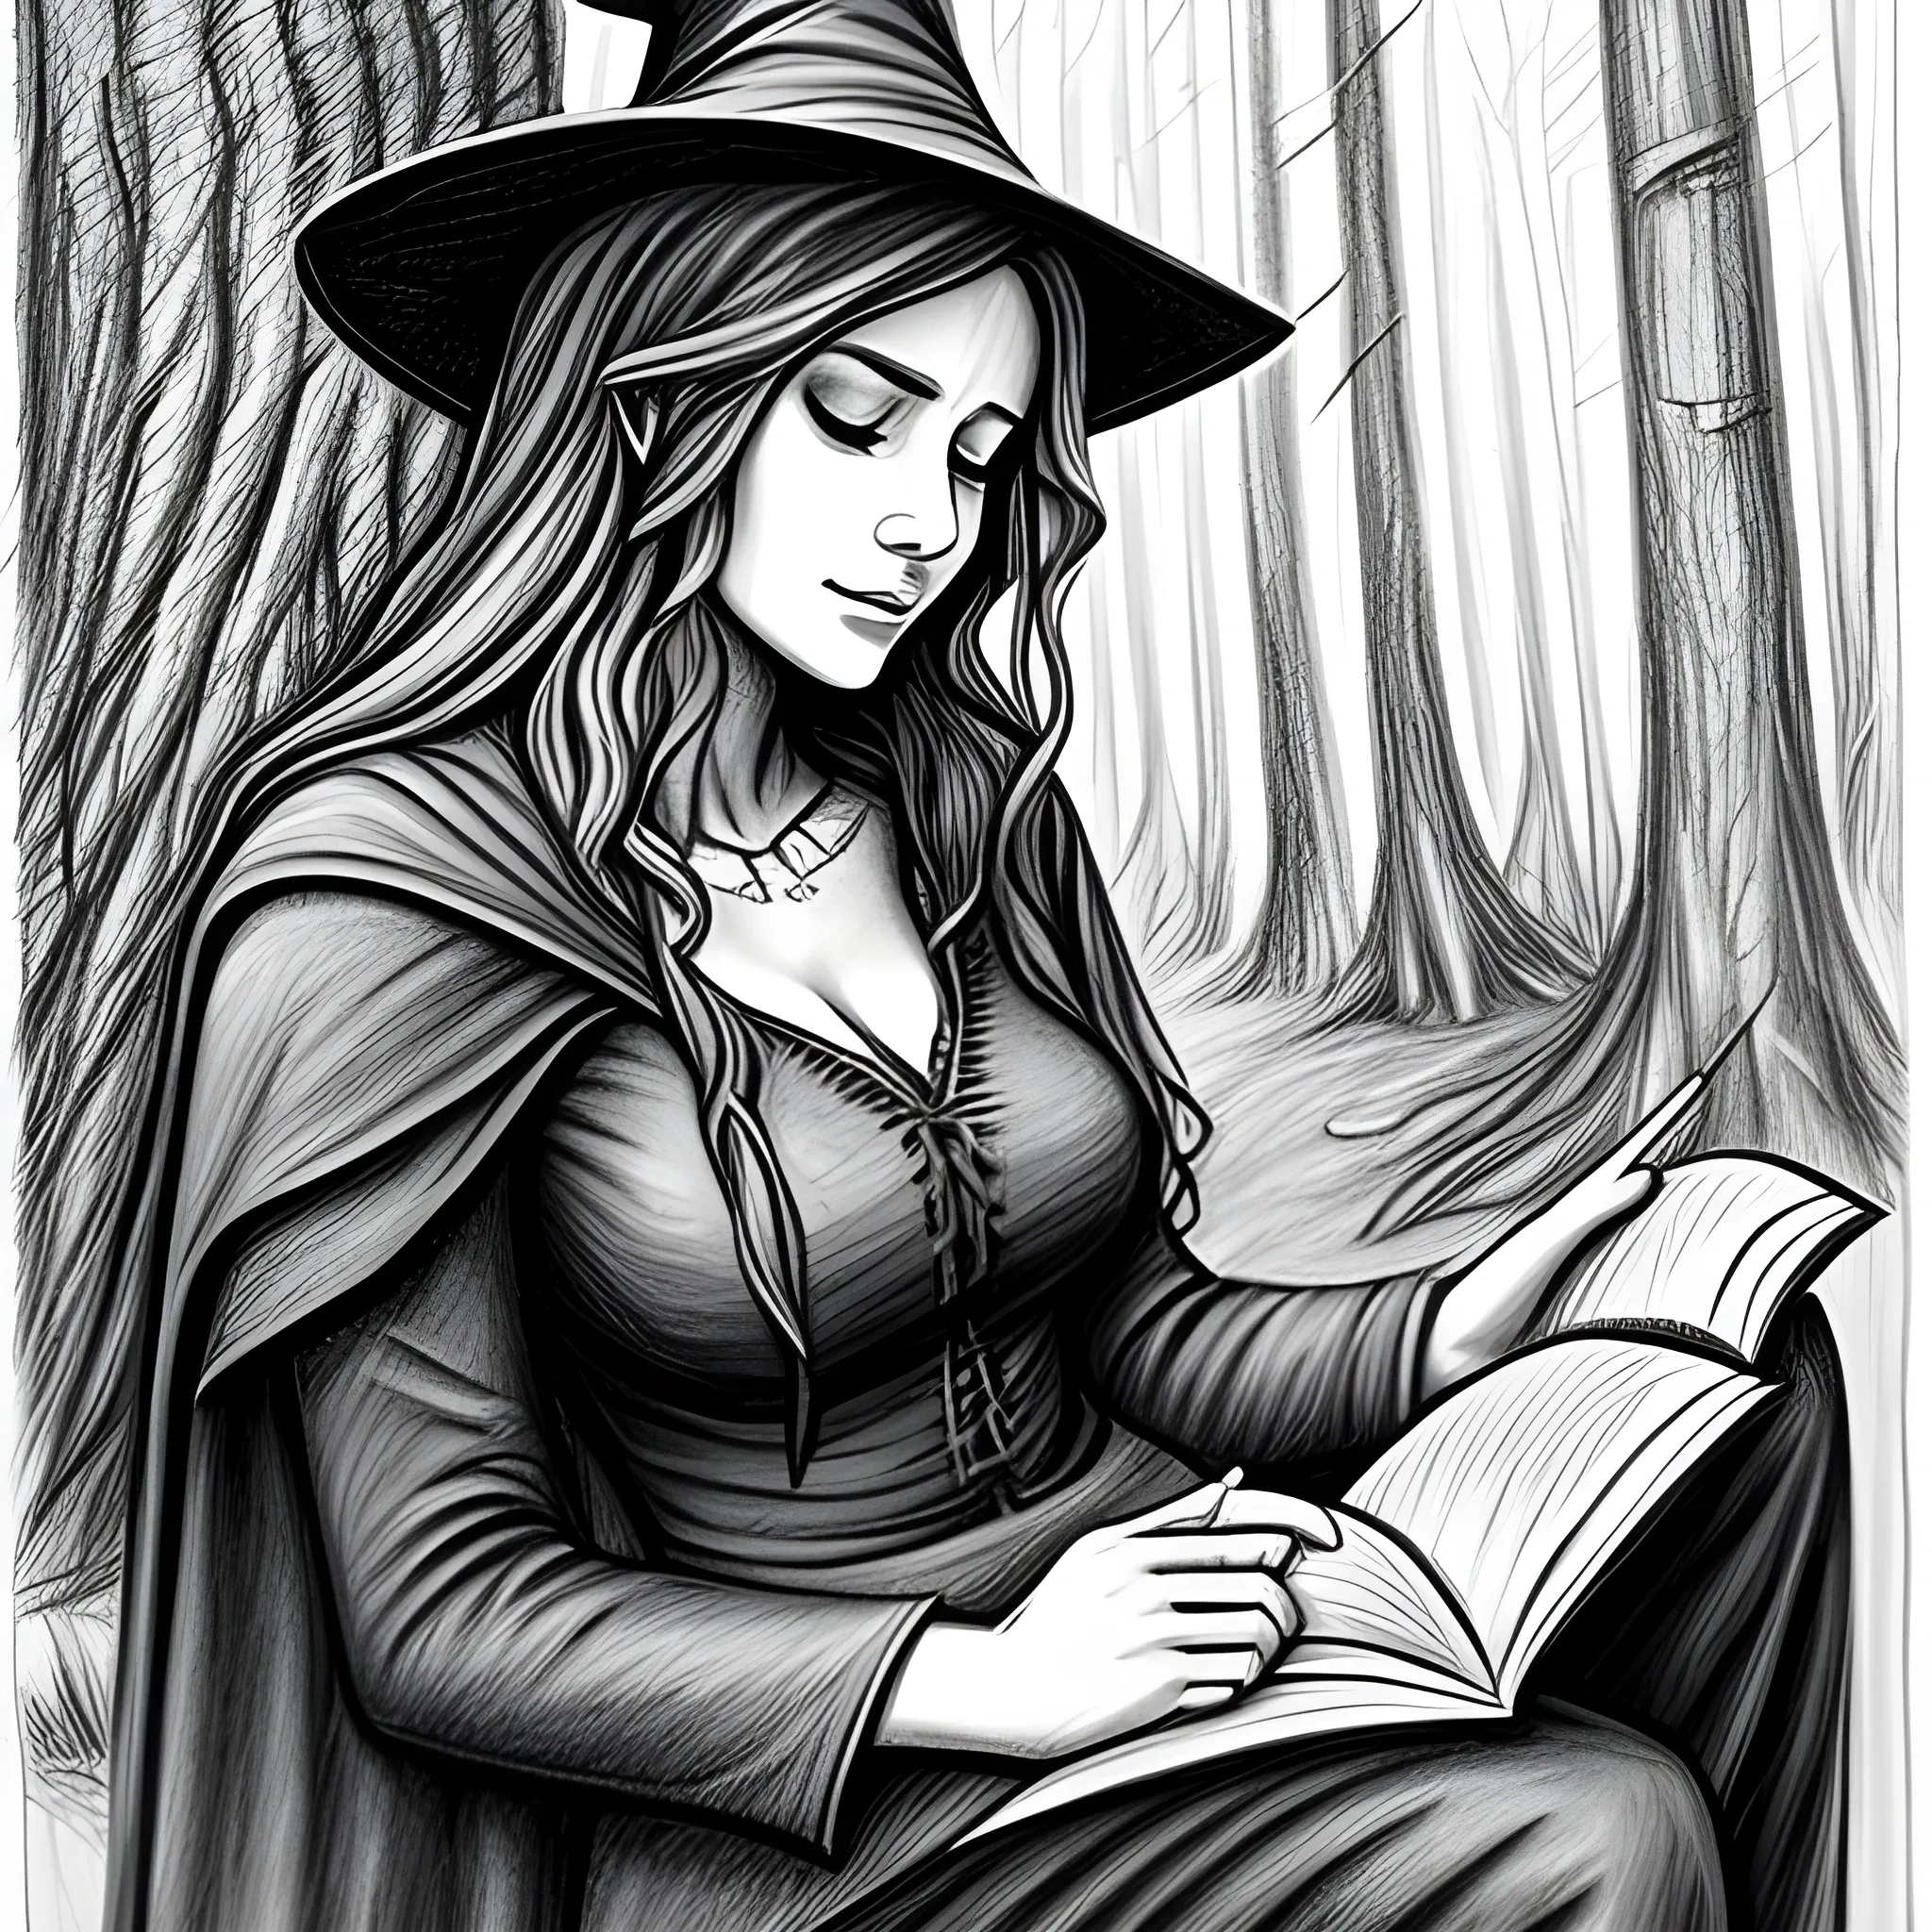 pencil sketch of a witchy woman reading a book in a forest